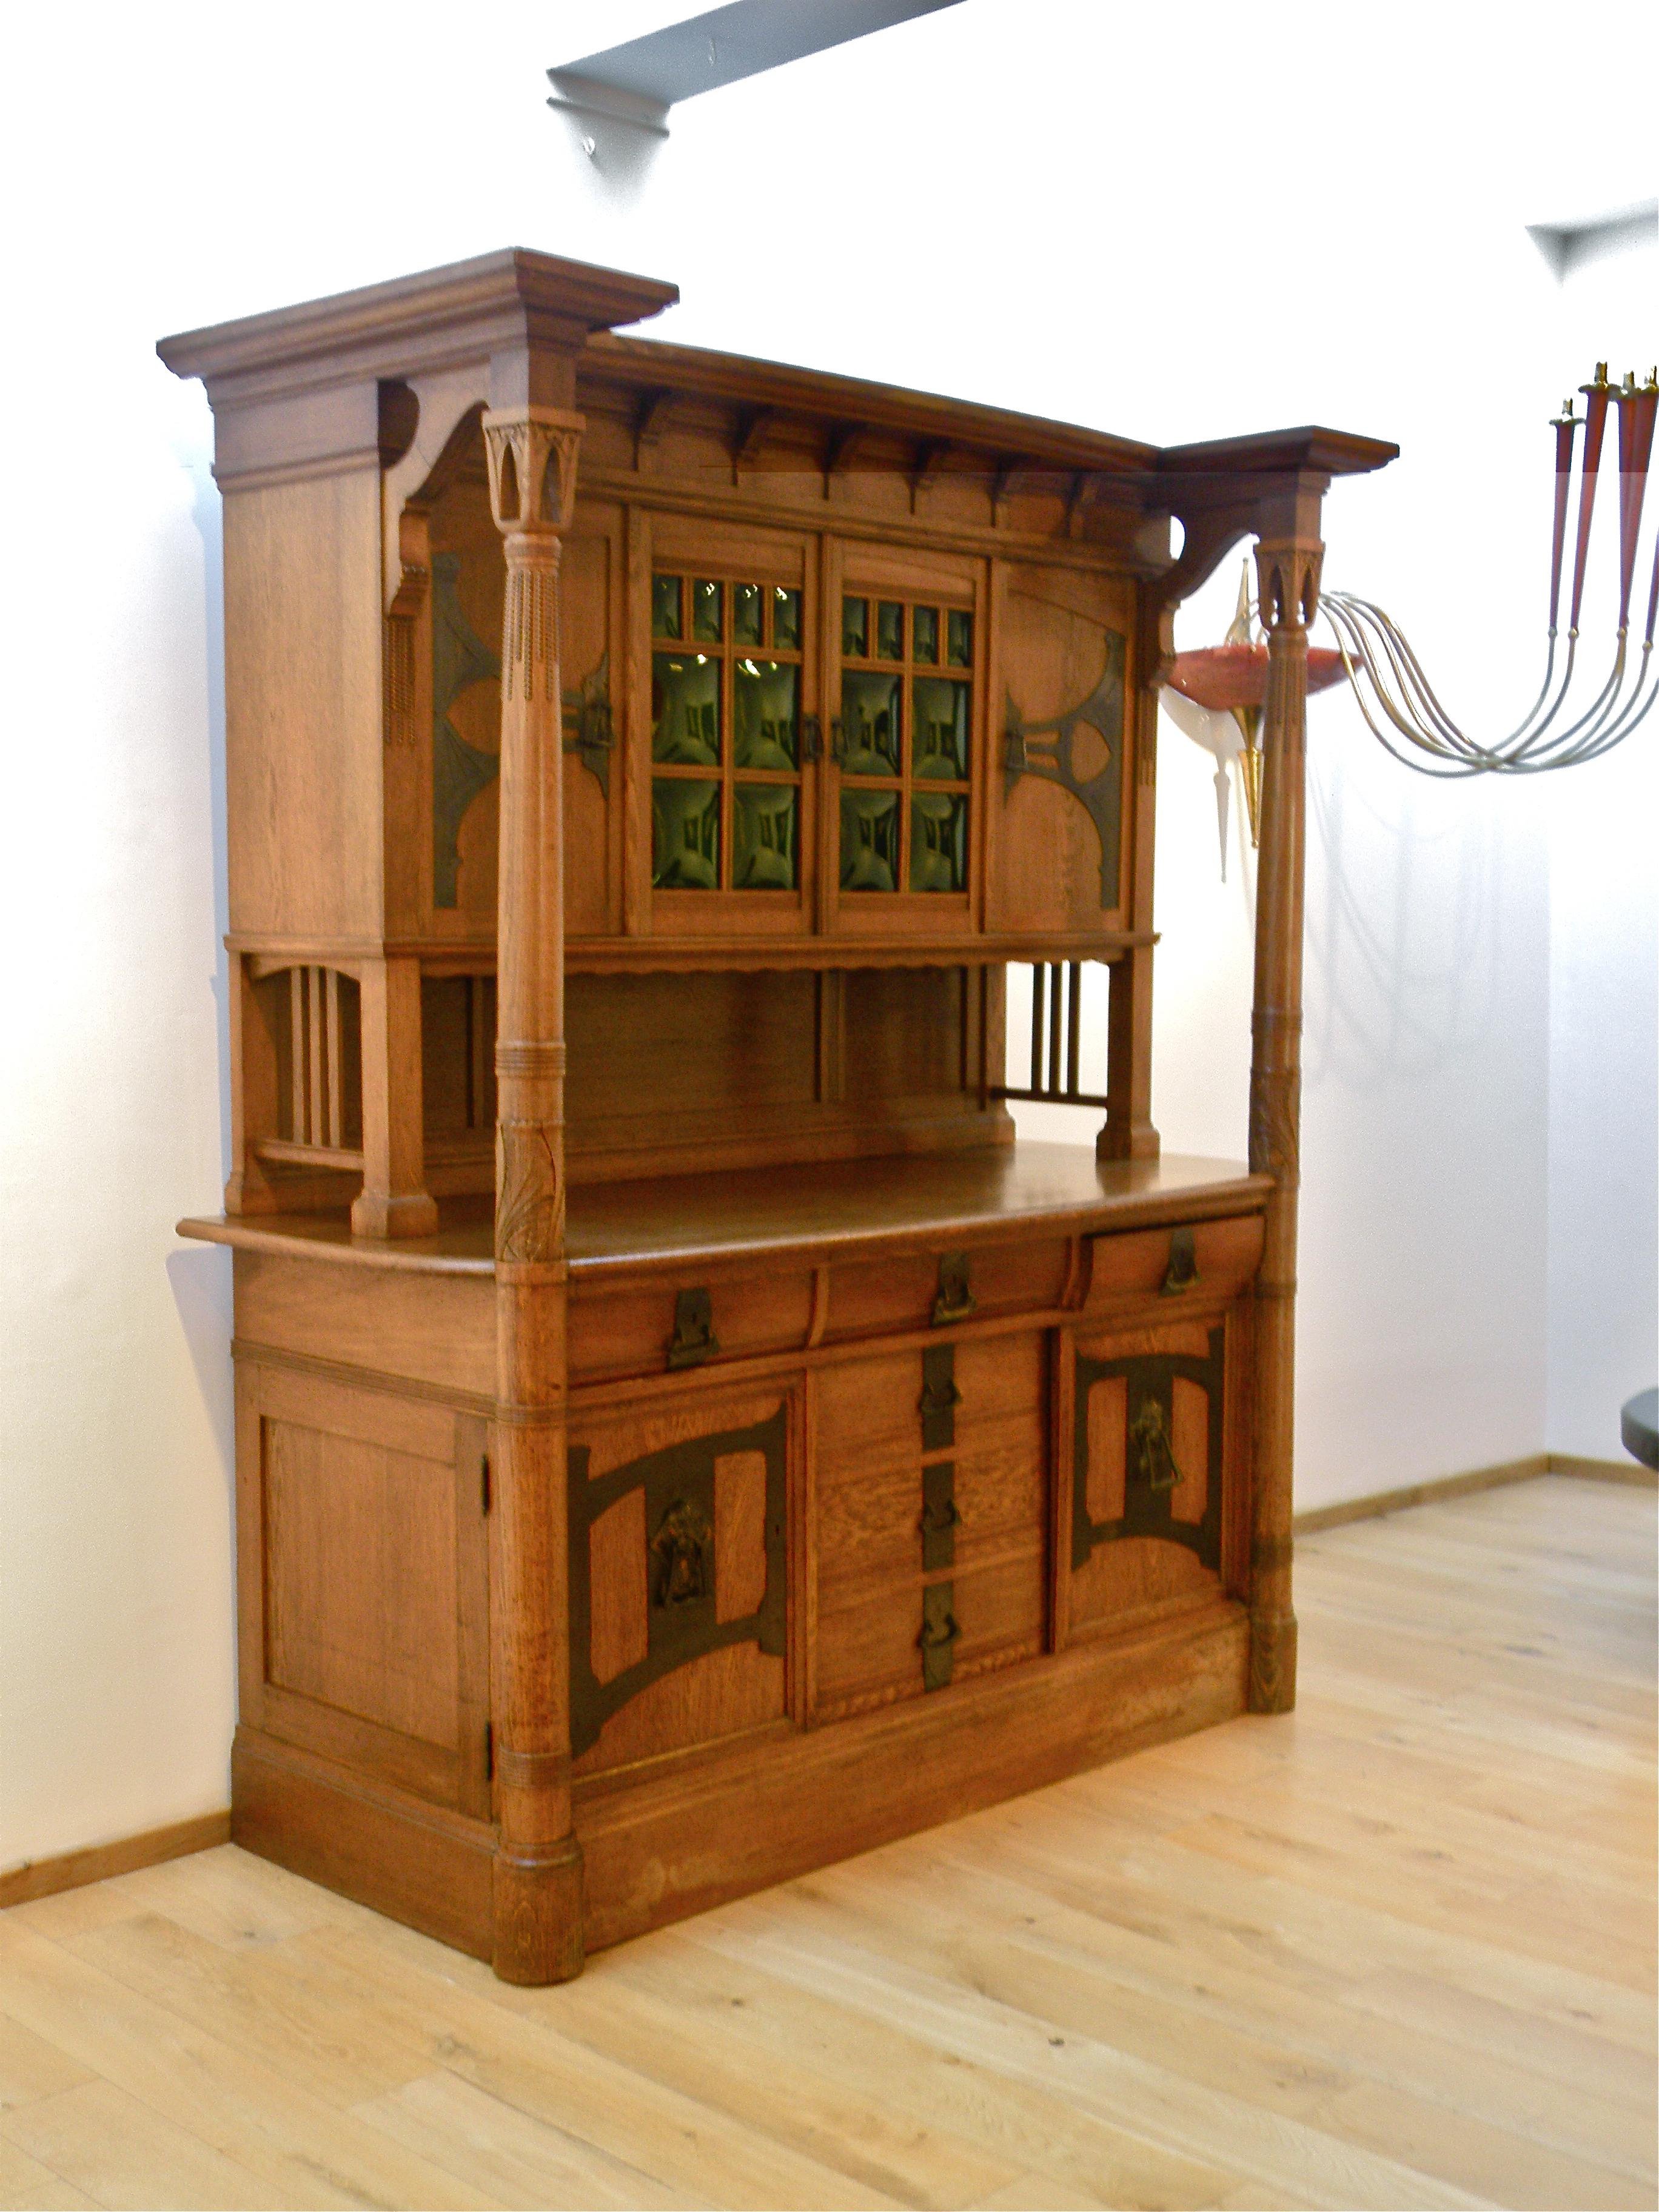 An impressive Northern European Arts & Crafts sideboard.
Oak, with carved stylised lotus blossom capped support columns, green glass panes, brass mounts and drawer and door pulls. (In two sections so can be more easily transported).